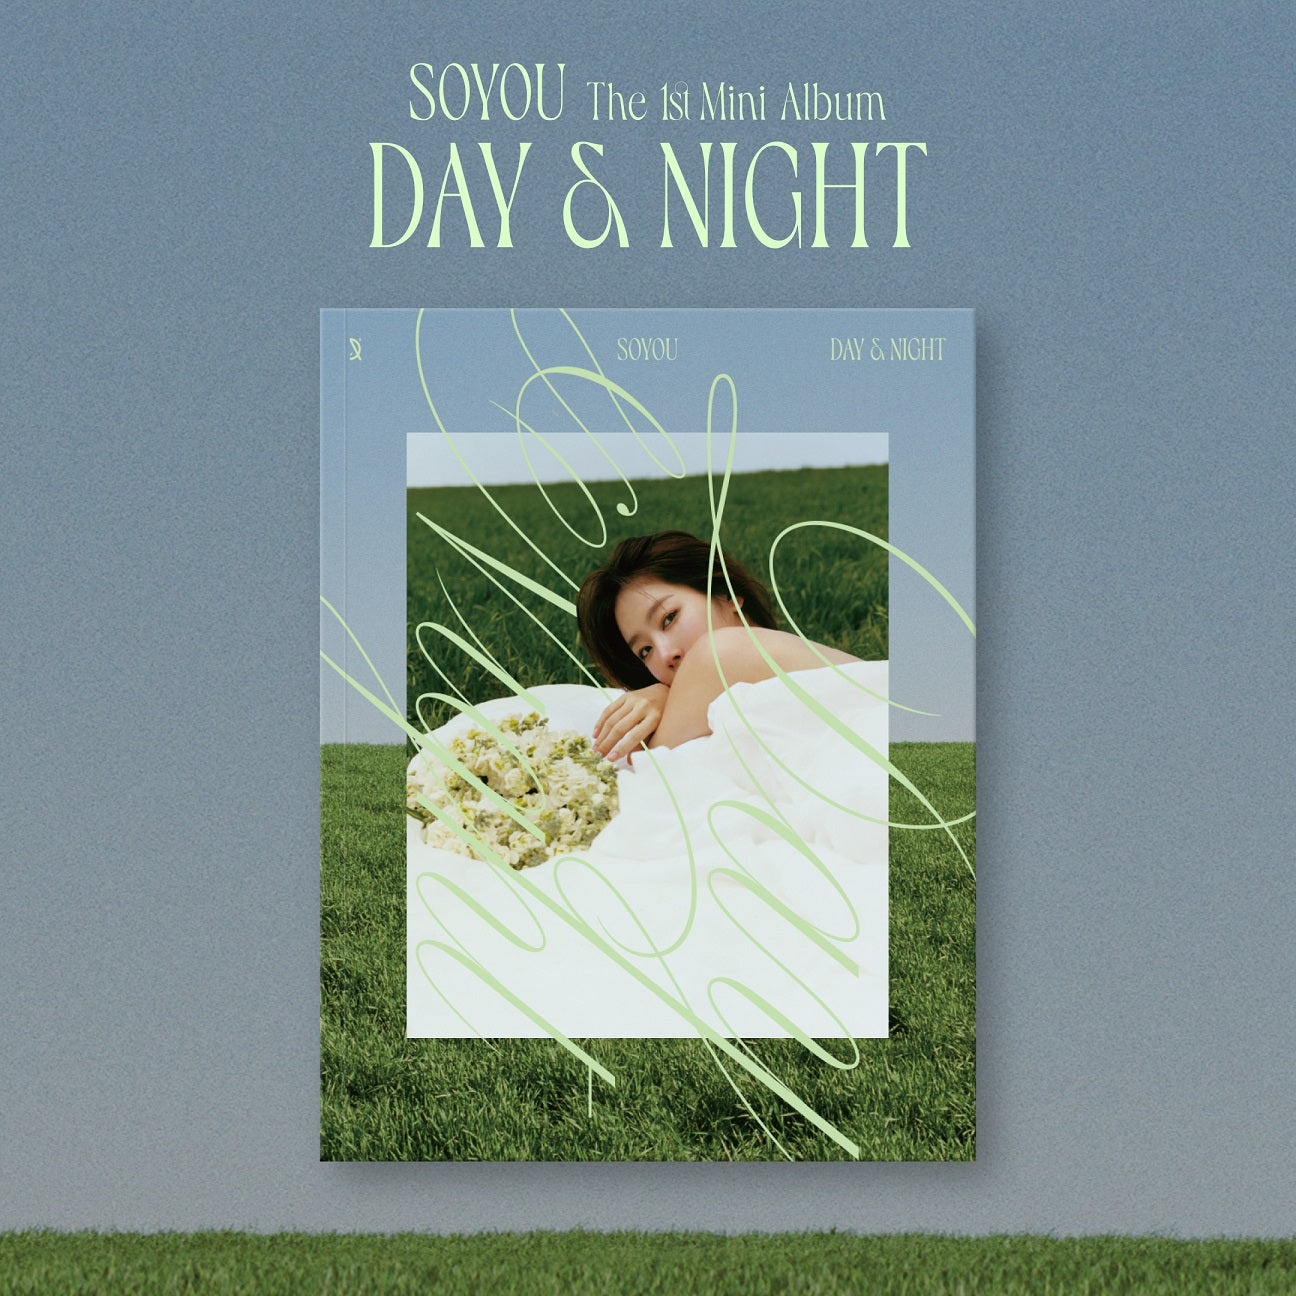 SOYOU 1ST MINI ALBUM 'DAY & NIGHT' COVER